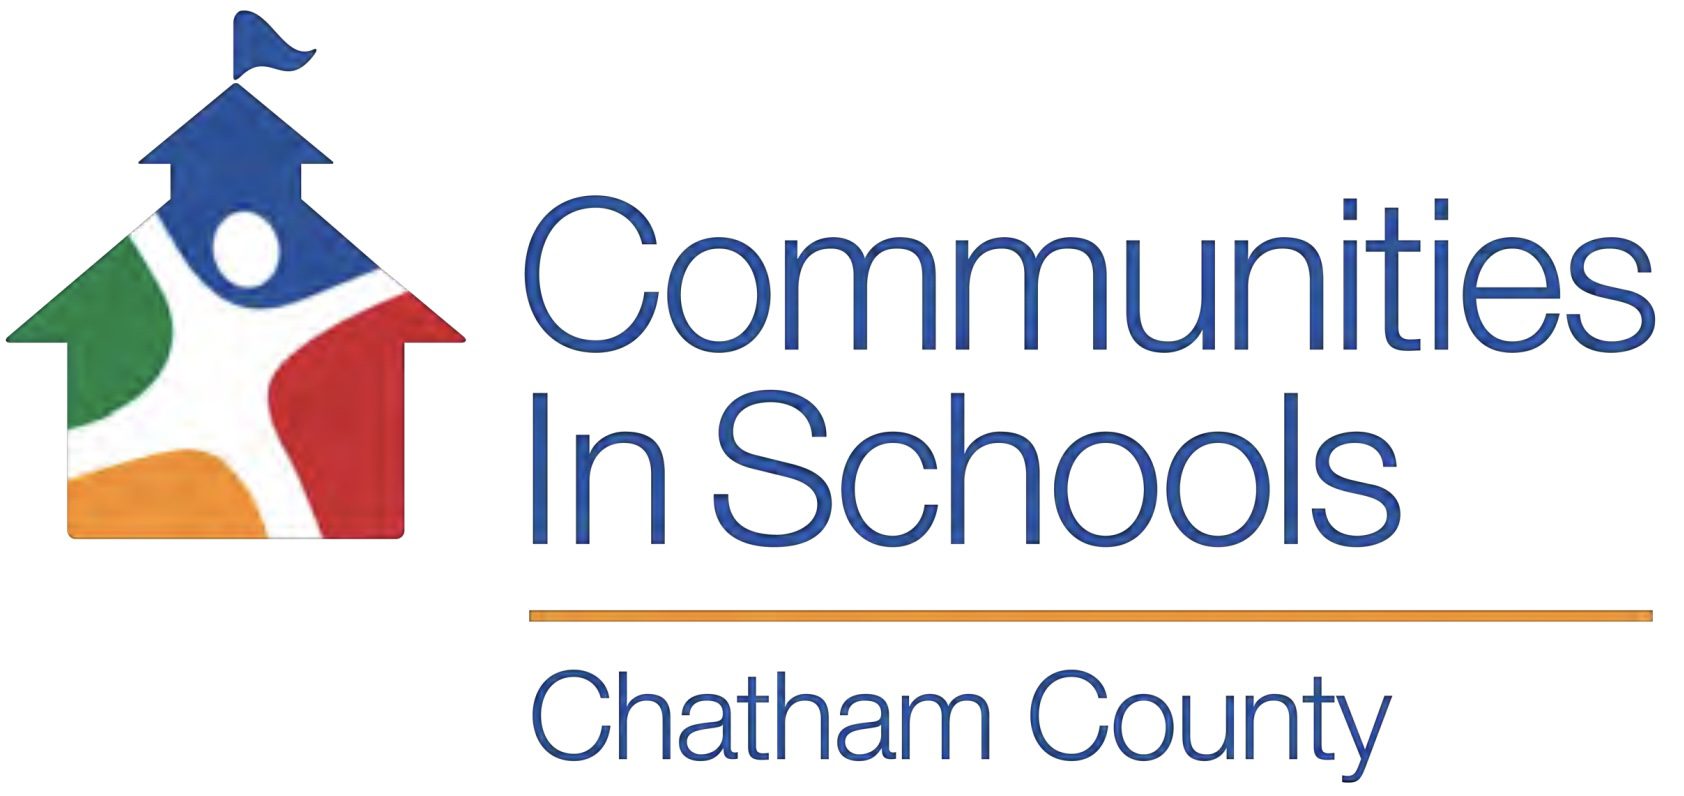 Communities In Schools of Chatham County